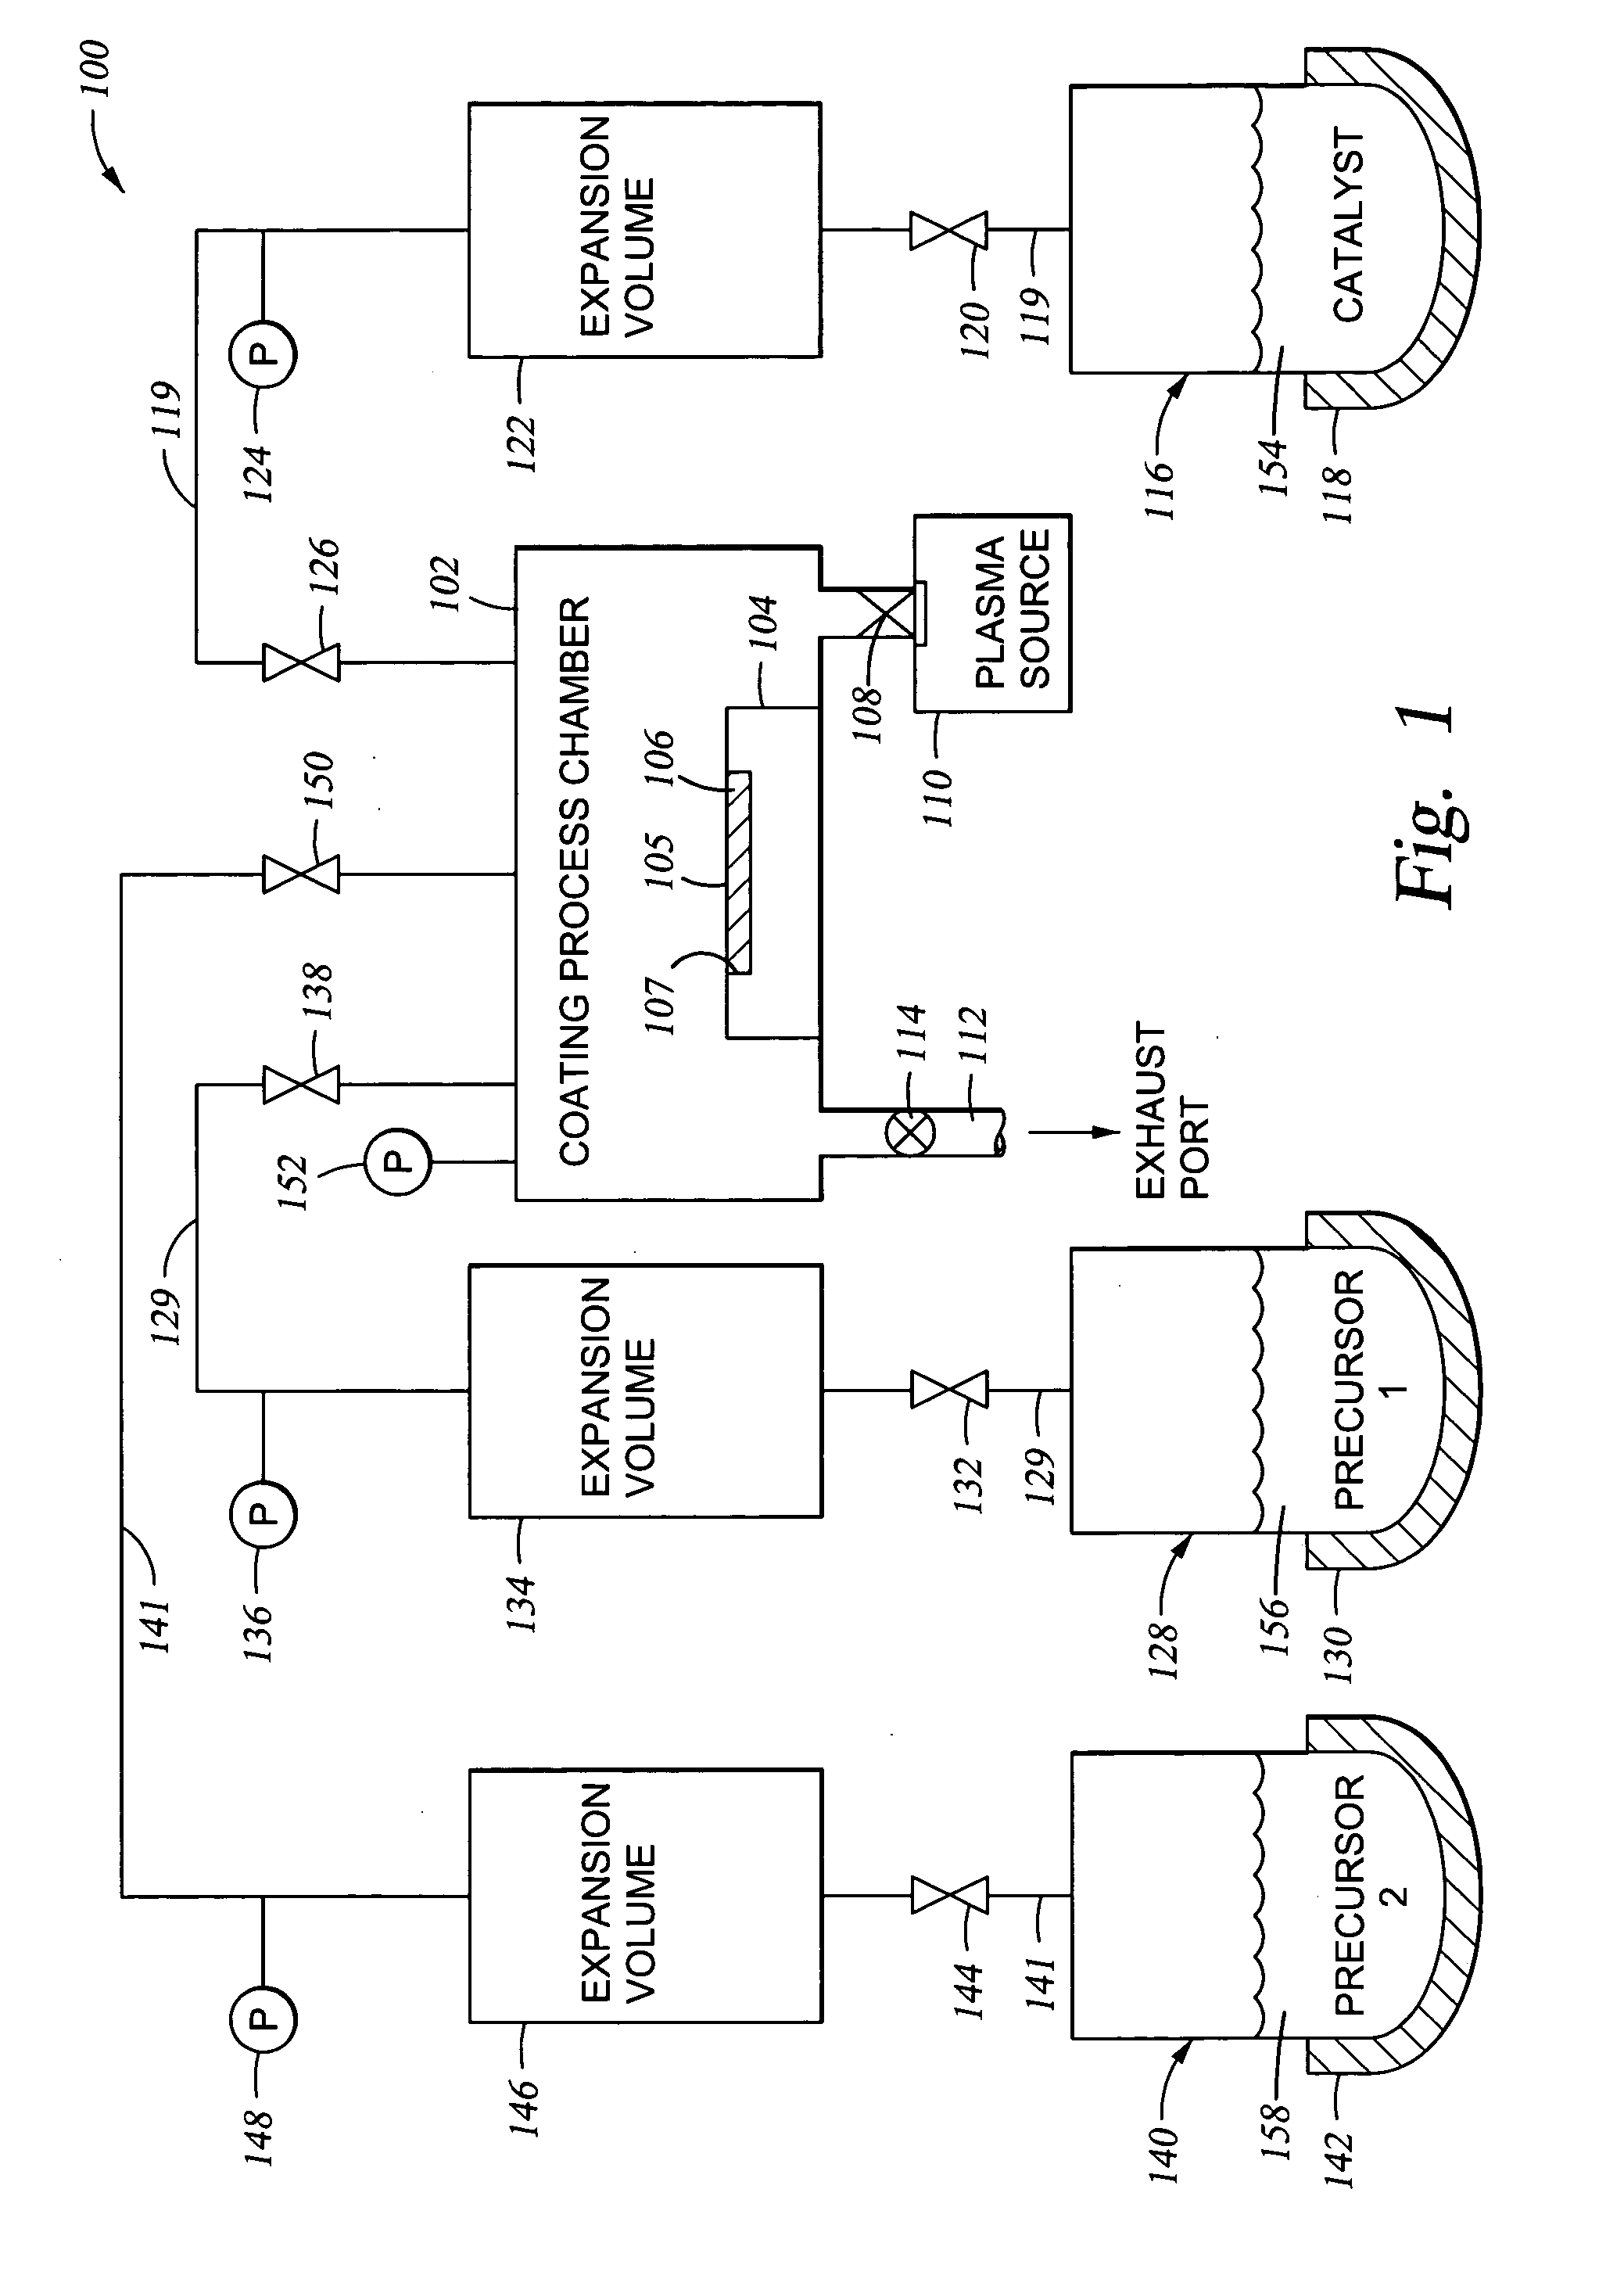 Apparatus and method for controlled application of reactive vapors to produce thin films and coatings